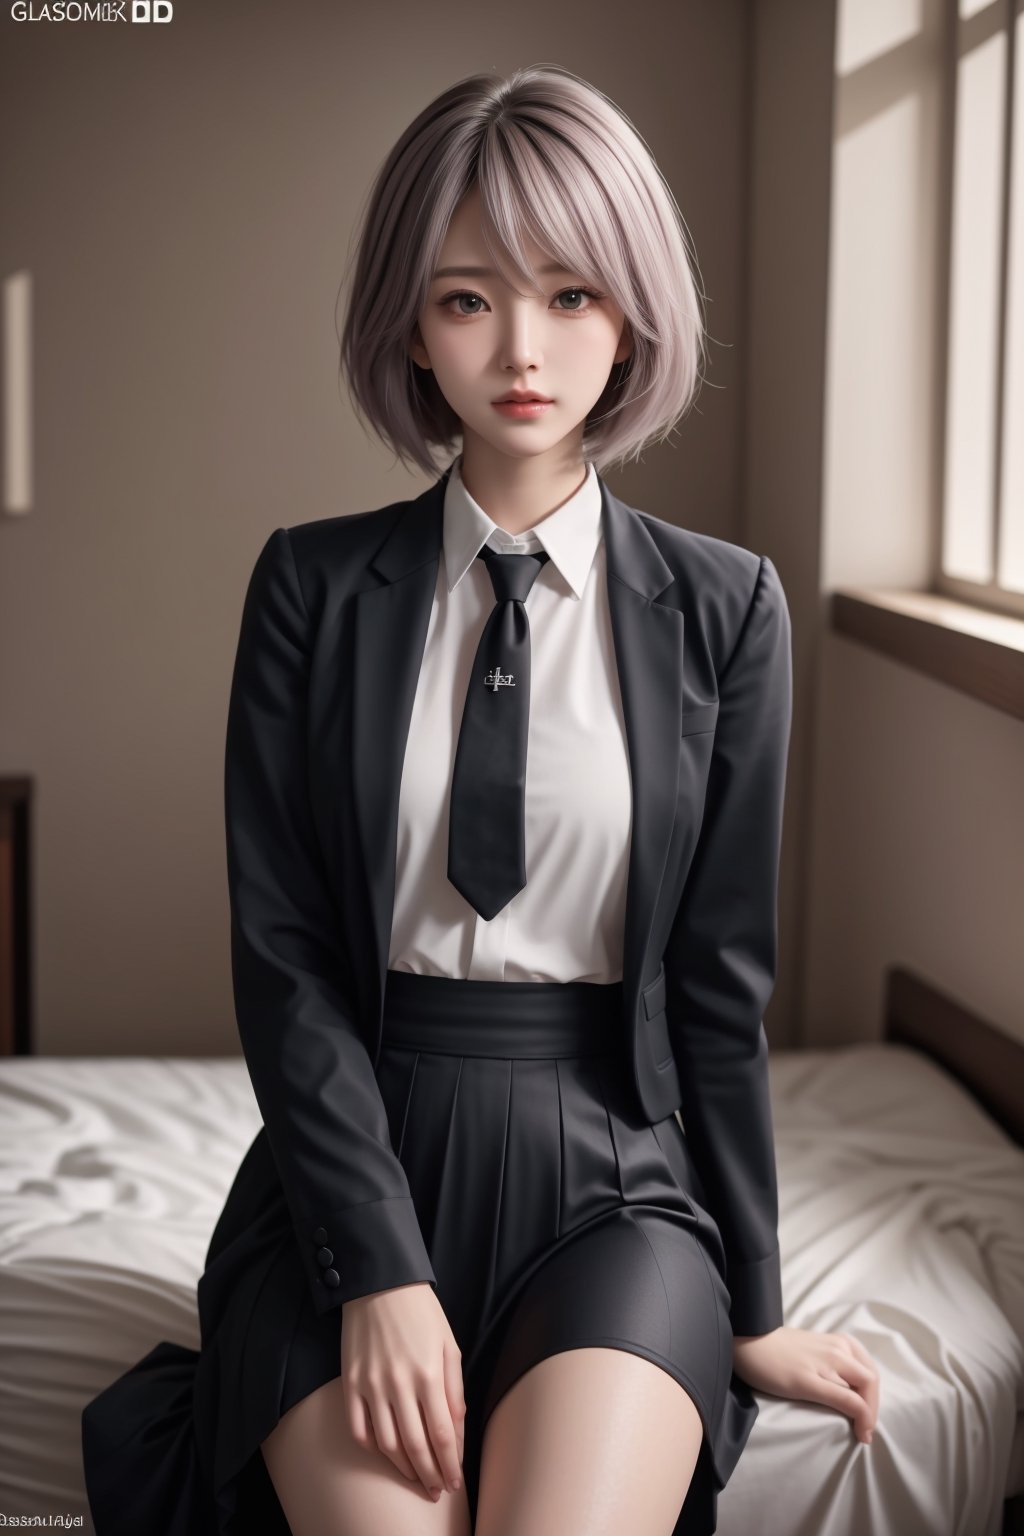 (glamour:1.3)-photo-of-1girl, mix-of-every-hair-color, shameless-bishoujo, bombshell-body, no-virgin-anymore, (((relaxed))), (((Ultra-HD-details, Ultra-HD-detailed, Ultra-HD-realistic))), RAW-Photo, analog-style, analog-photo, remarkable-colors, main-focus, BREAK wearing Traditional uniform with a knee-length skirt, matching blazer, and silk necktie, BREAK (((dating-the-viewer, daisuki-overload, lover, dating-pov))), lit, cowboy-shot, Sugar babe, Young girl, 2b,<lora:659111690174031528:1.0>